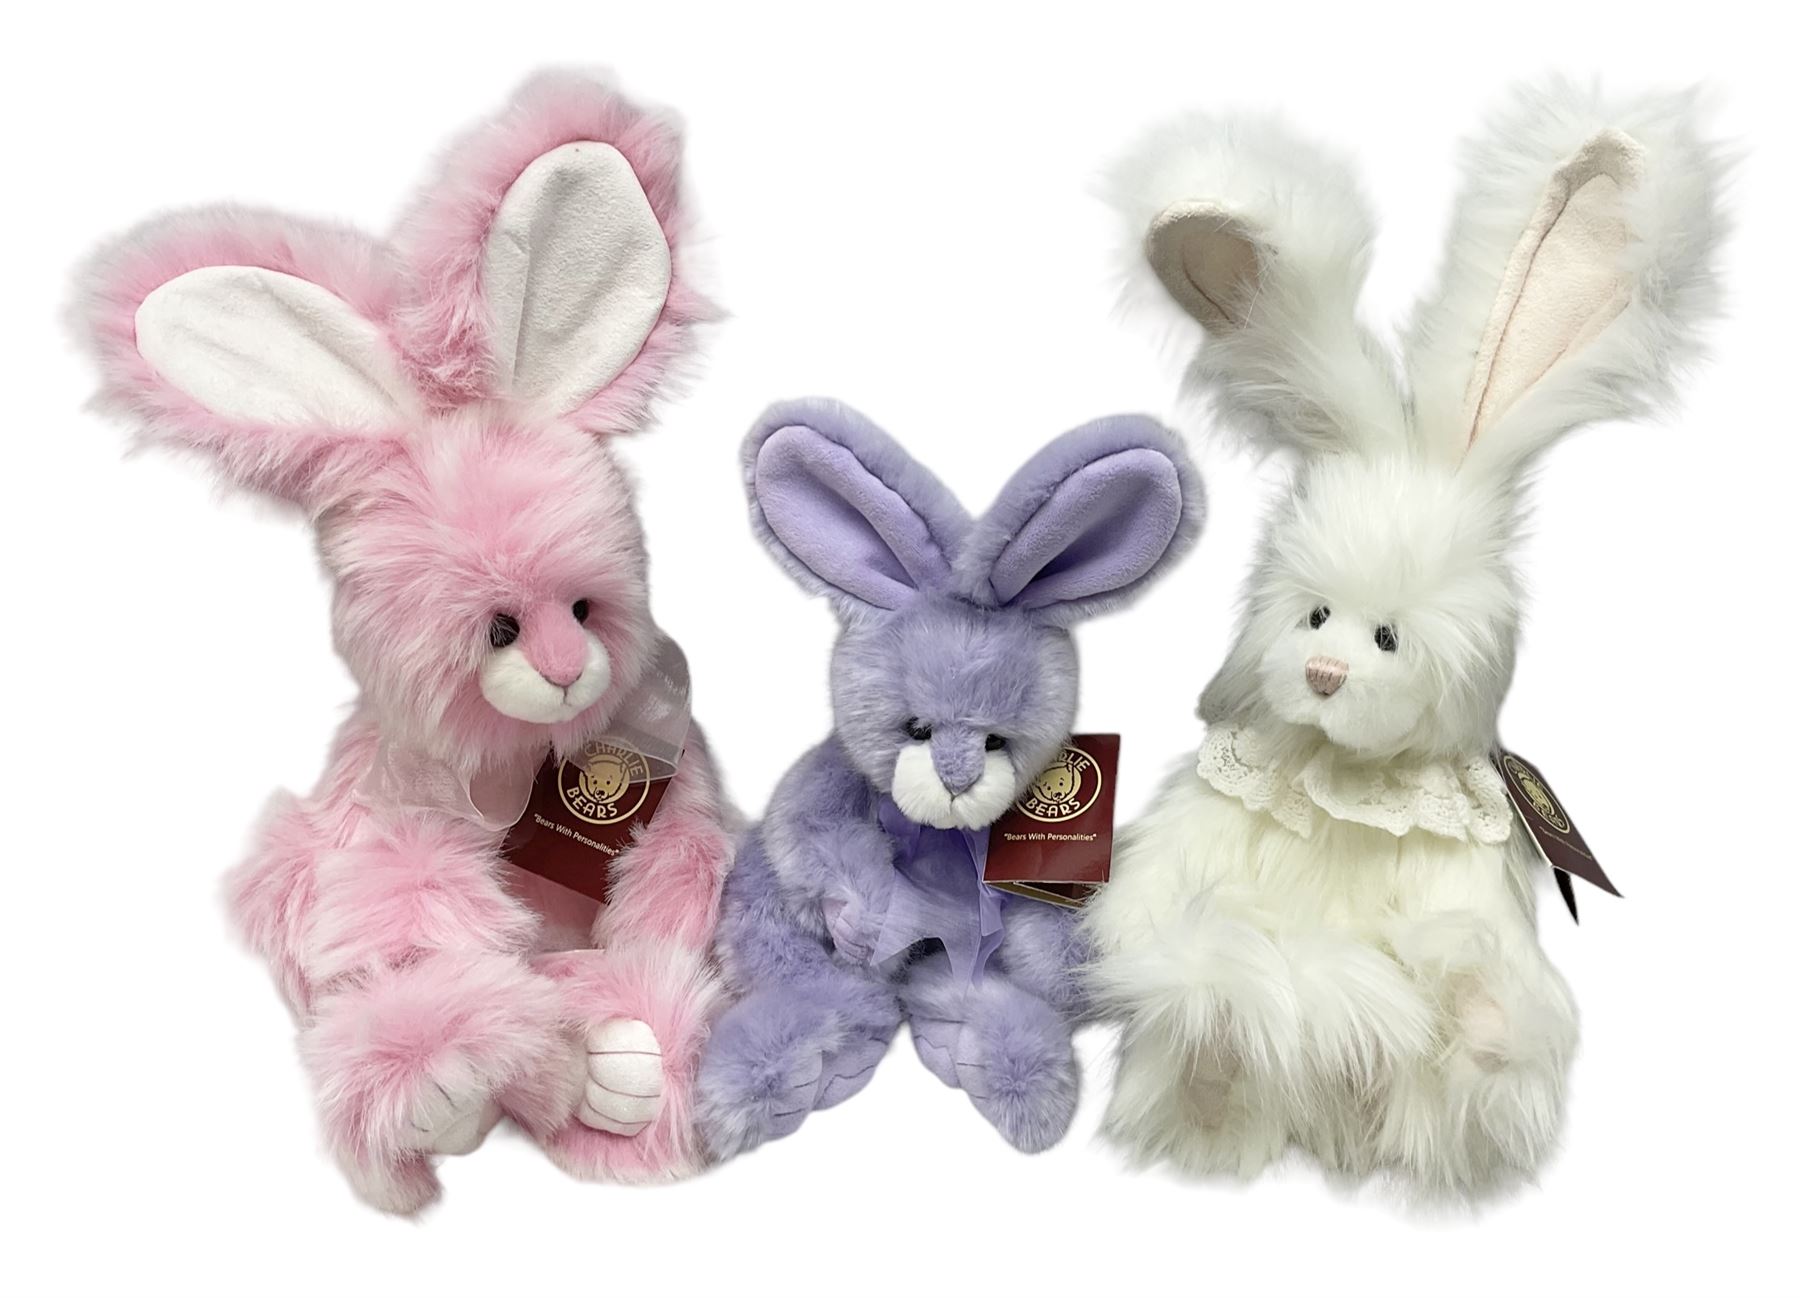 Charlie Bears rabbits - 'Pear Drop' CB2052340; 'Mila' CB2060050; and 'Dew Drop' CB2052350; all with